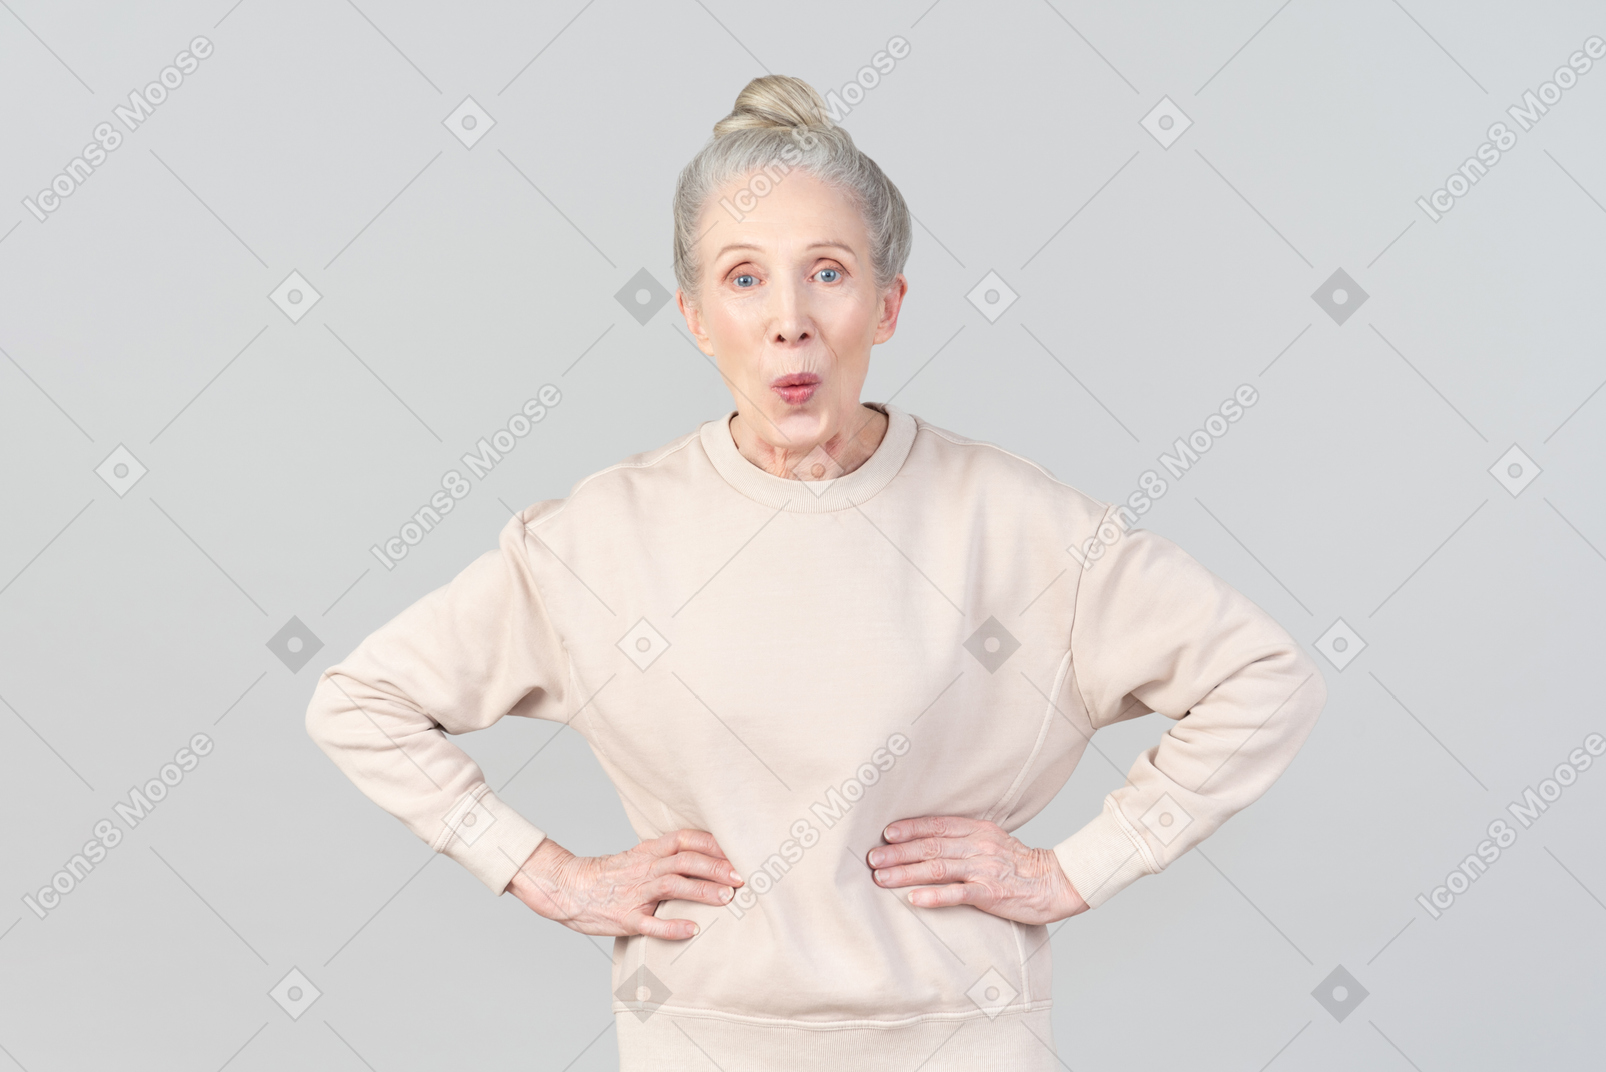 Old lady with hands on waist